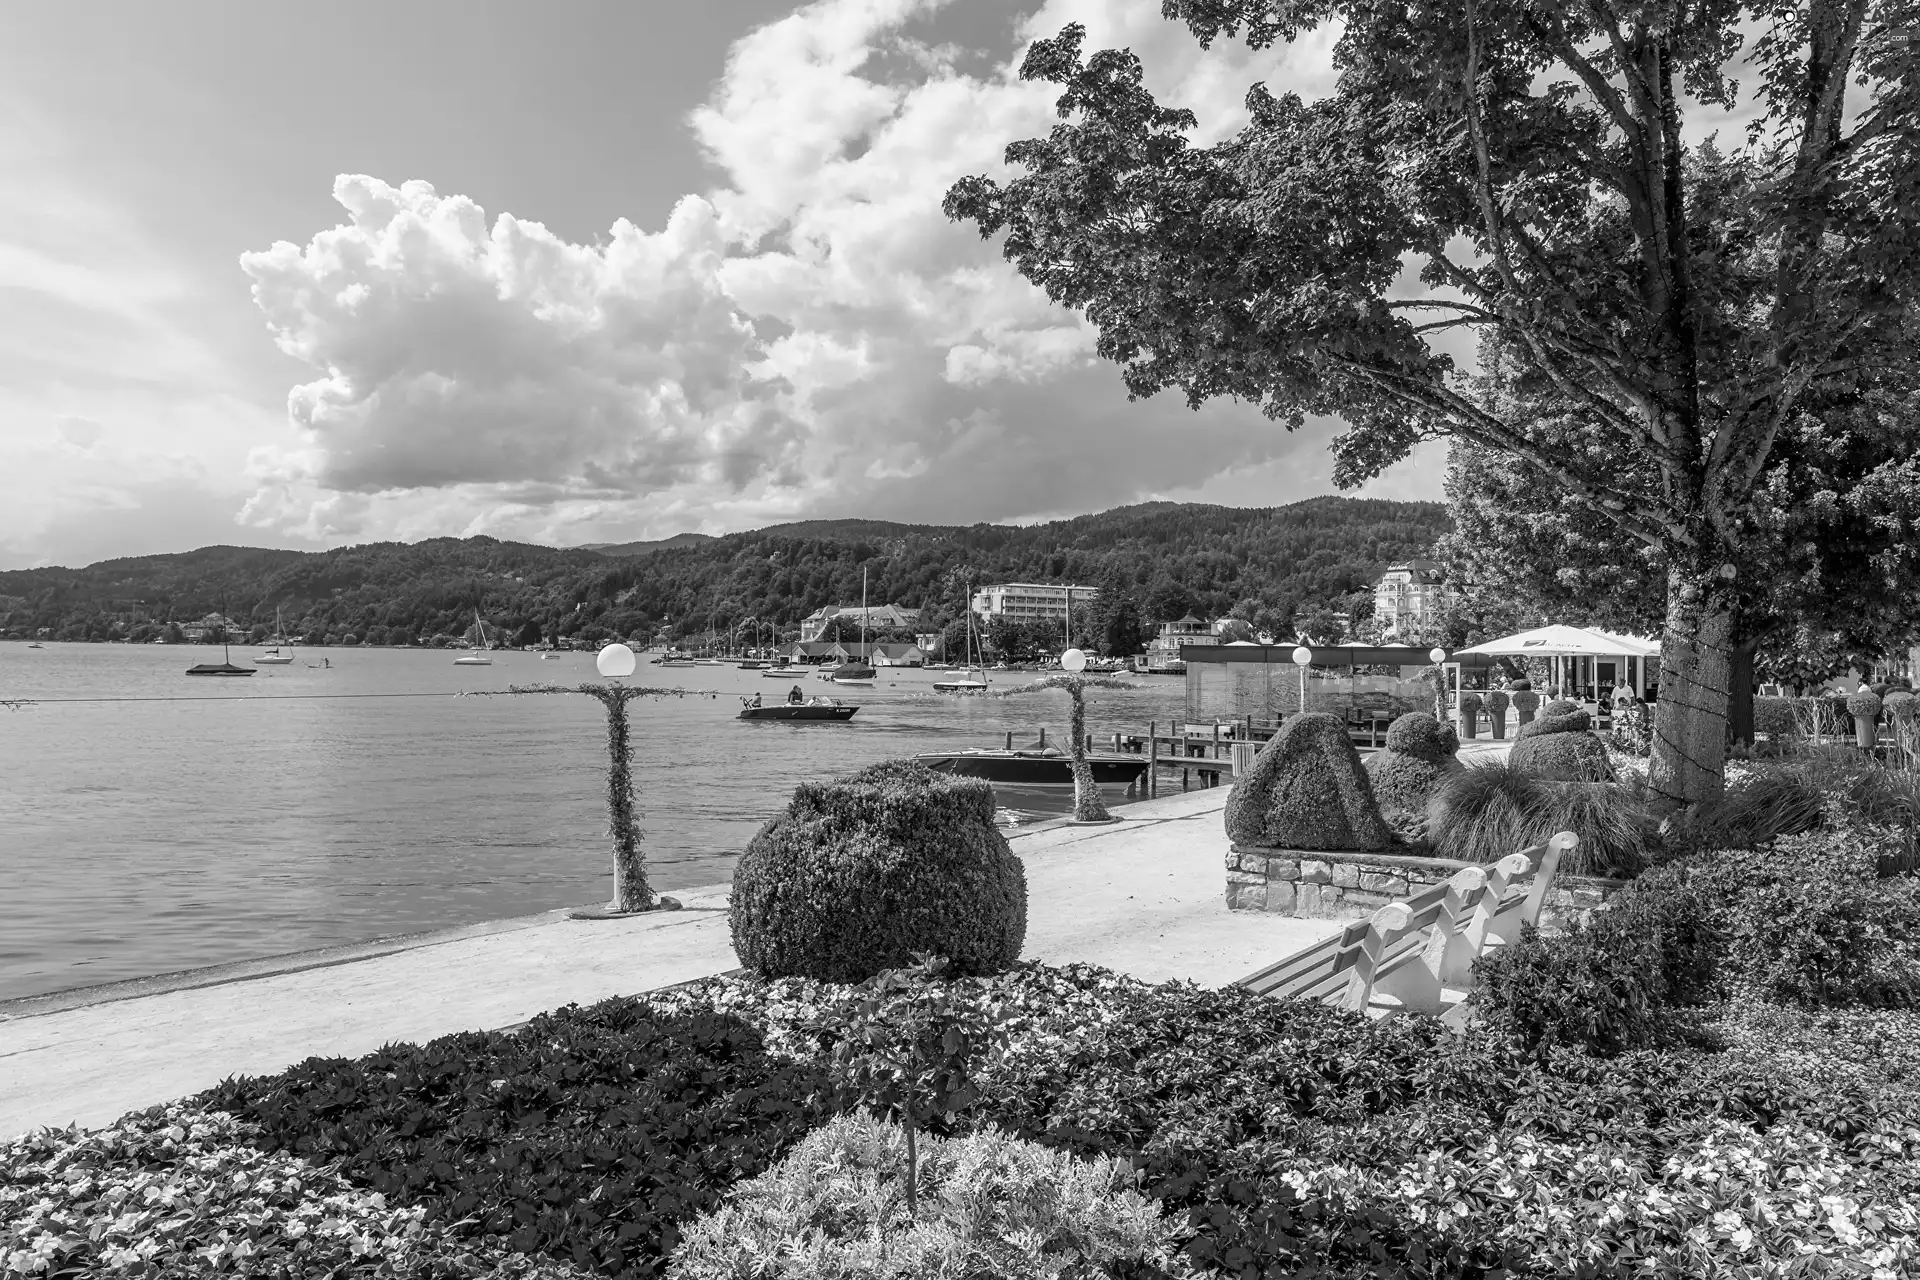 Flower-beds, Flowers, trees, viewes, Harbour, clouds, lake, Boats, Mountains